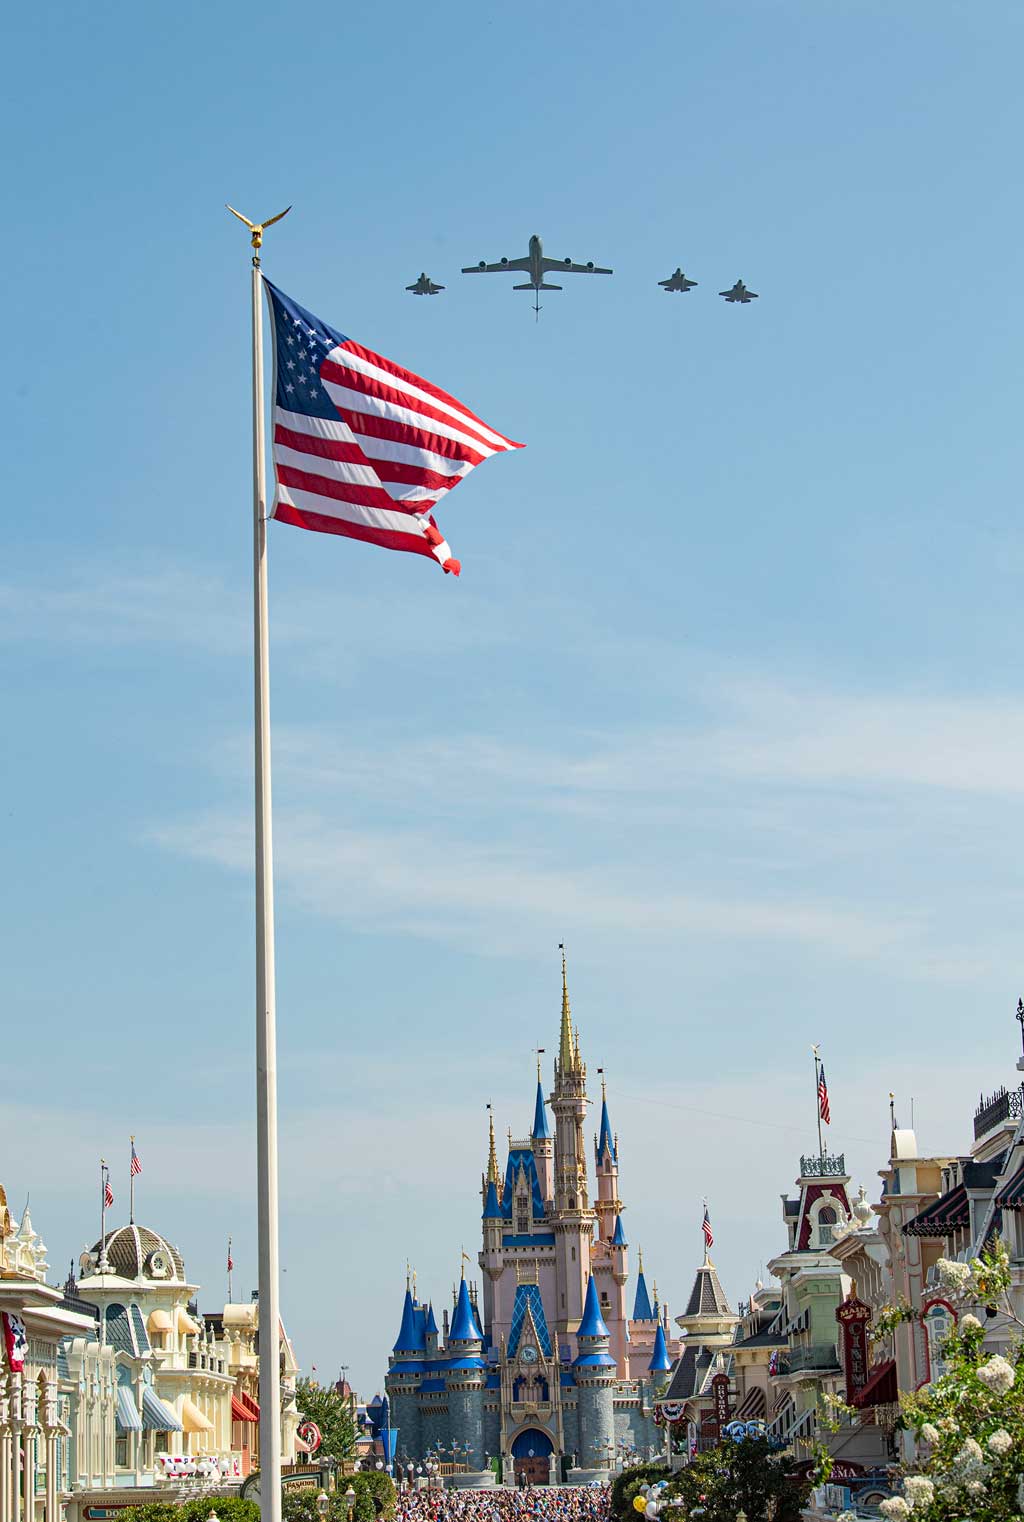  Next The U.S. Air Force conducts a special Independence Day flyover of Magic Kingdom Park on July 4, 2023. A squadron of F-35 stealth fighter jets flown by the 33rd Fighter Wing made two passes over the world-famous theme park. The first included a KC-135 tanker flown by the 6th Air Refueling Wing to mark the 100th anniversary of the Air Force’s 100 years of aerial refueling capabilities. (Abigail Nilsson, Photographer) The U.S. Air Force conducts a special Independence Day flyover of Magic Kingdom Park on July 4, 2023. A squadron of F-35 stealth fighter jets flown by the 33rd Fighter Wing made two passes over the world-famous theme park. The first included a KC-135 tanker flown by the 6th Air Refueling Wing to mark the 100th anniversary of the Air Force’s 100 years of aerial refueling capabilities. (Matt Stroshane, Photographer) 